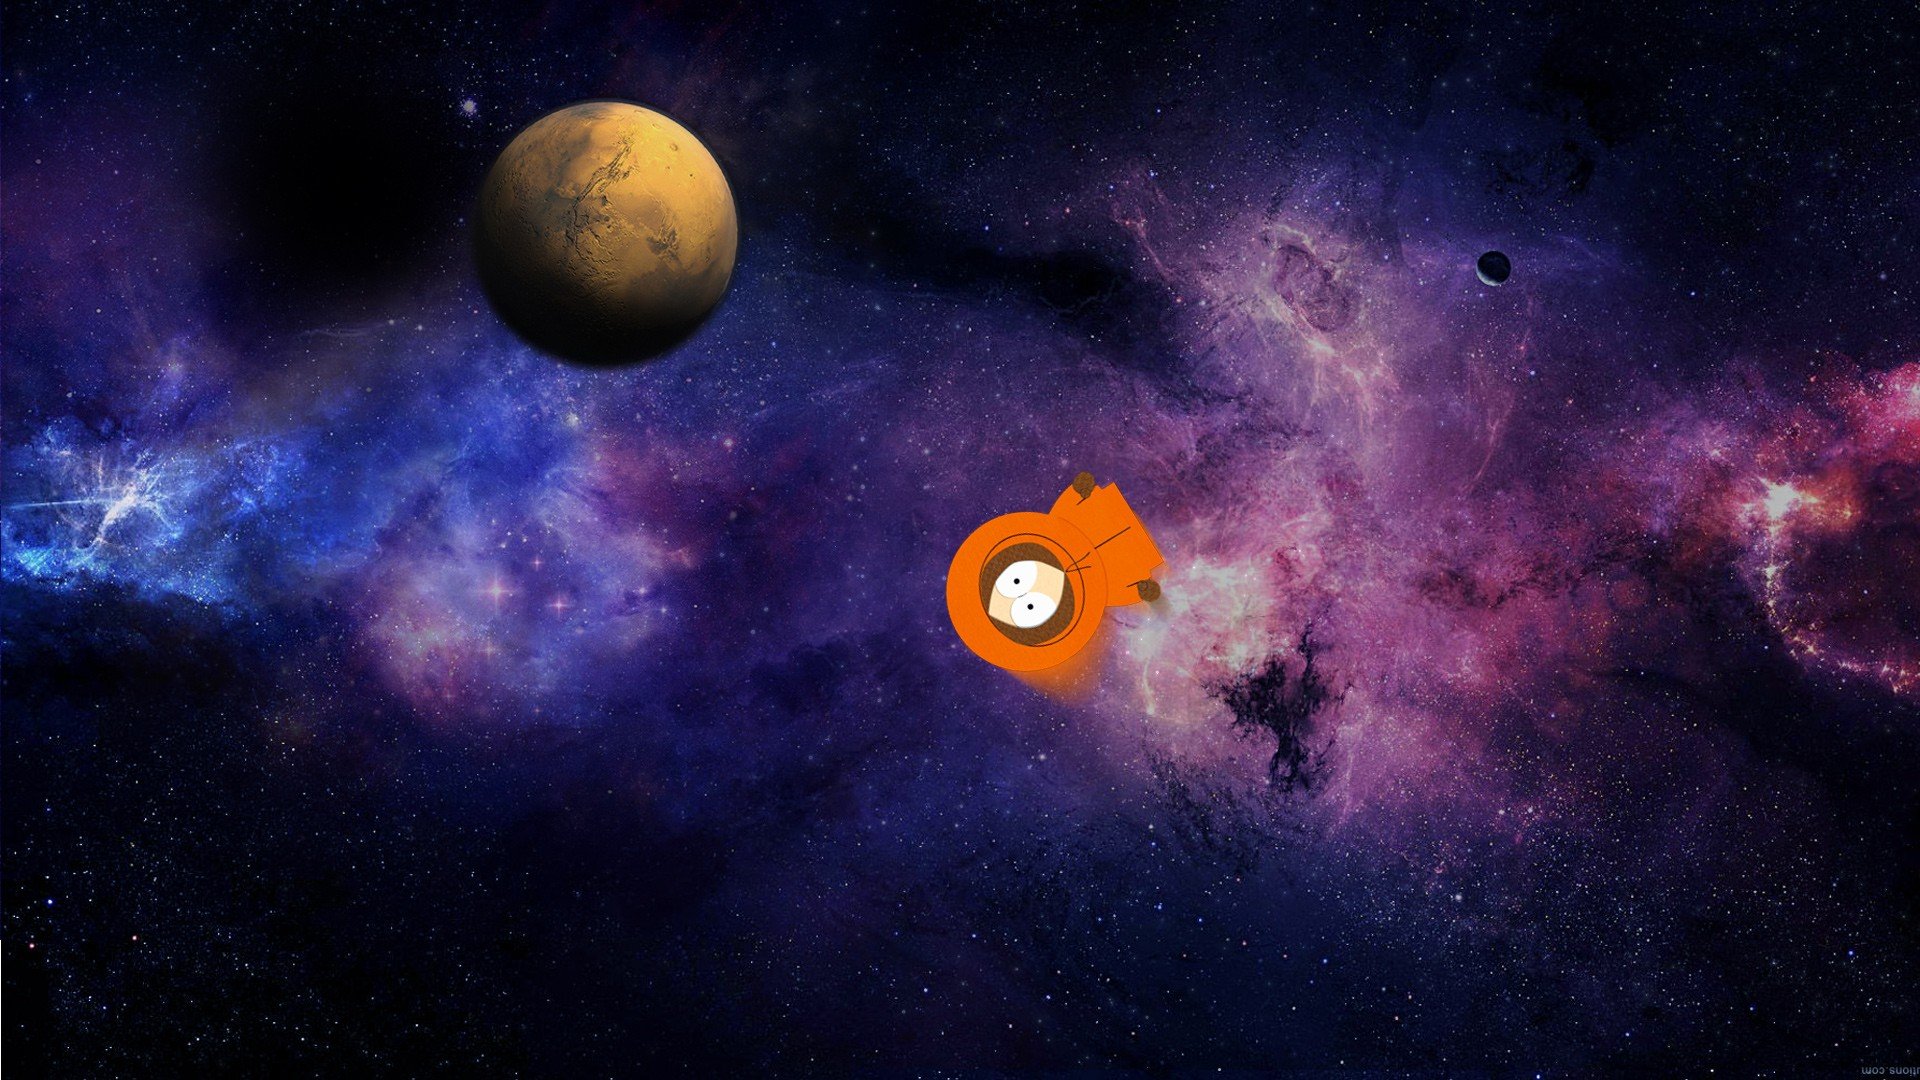 Kenny McCormick, South Park, Space Wallpaper